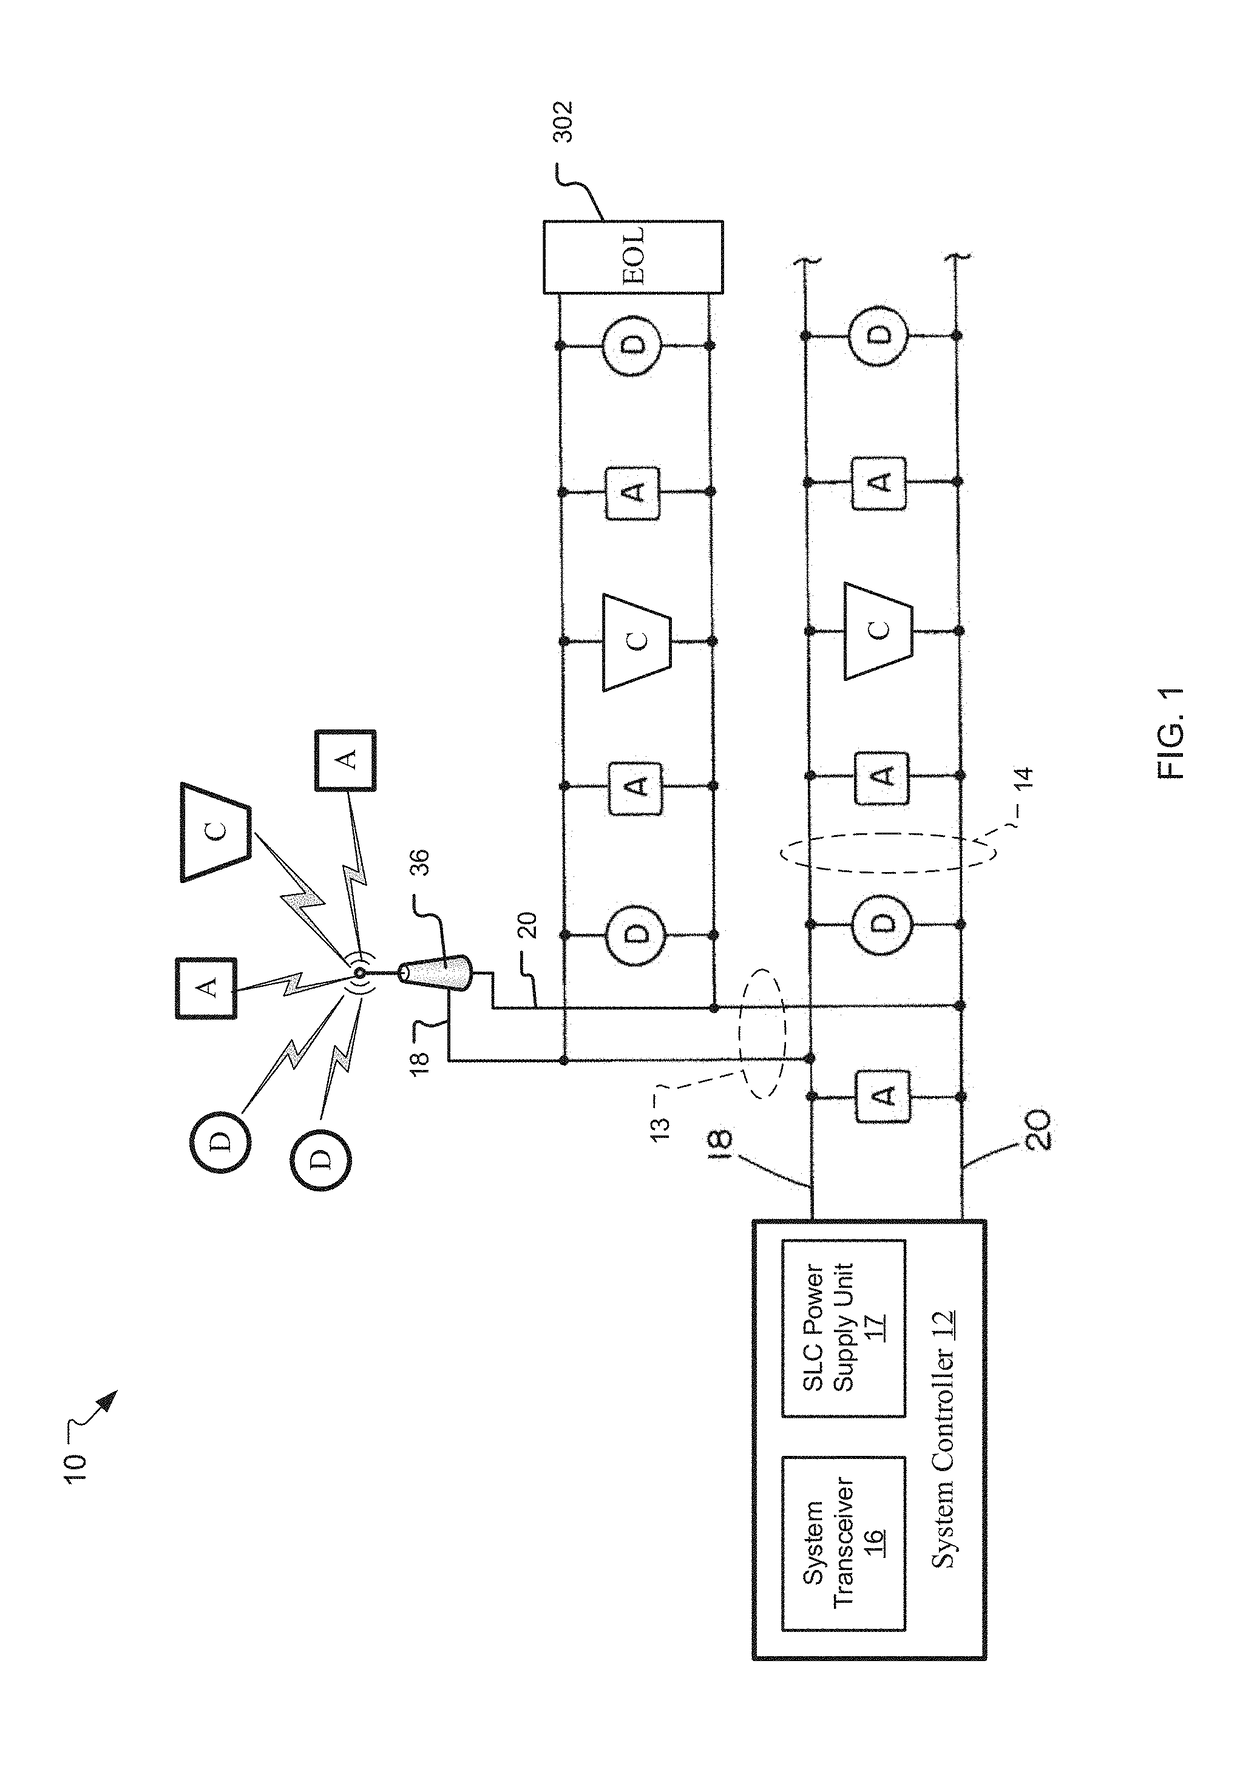 System and method for providing temporary power to intermittent units